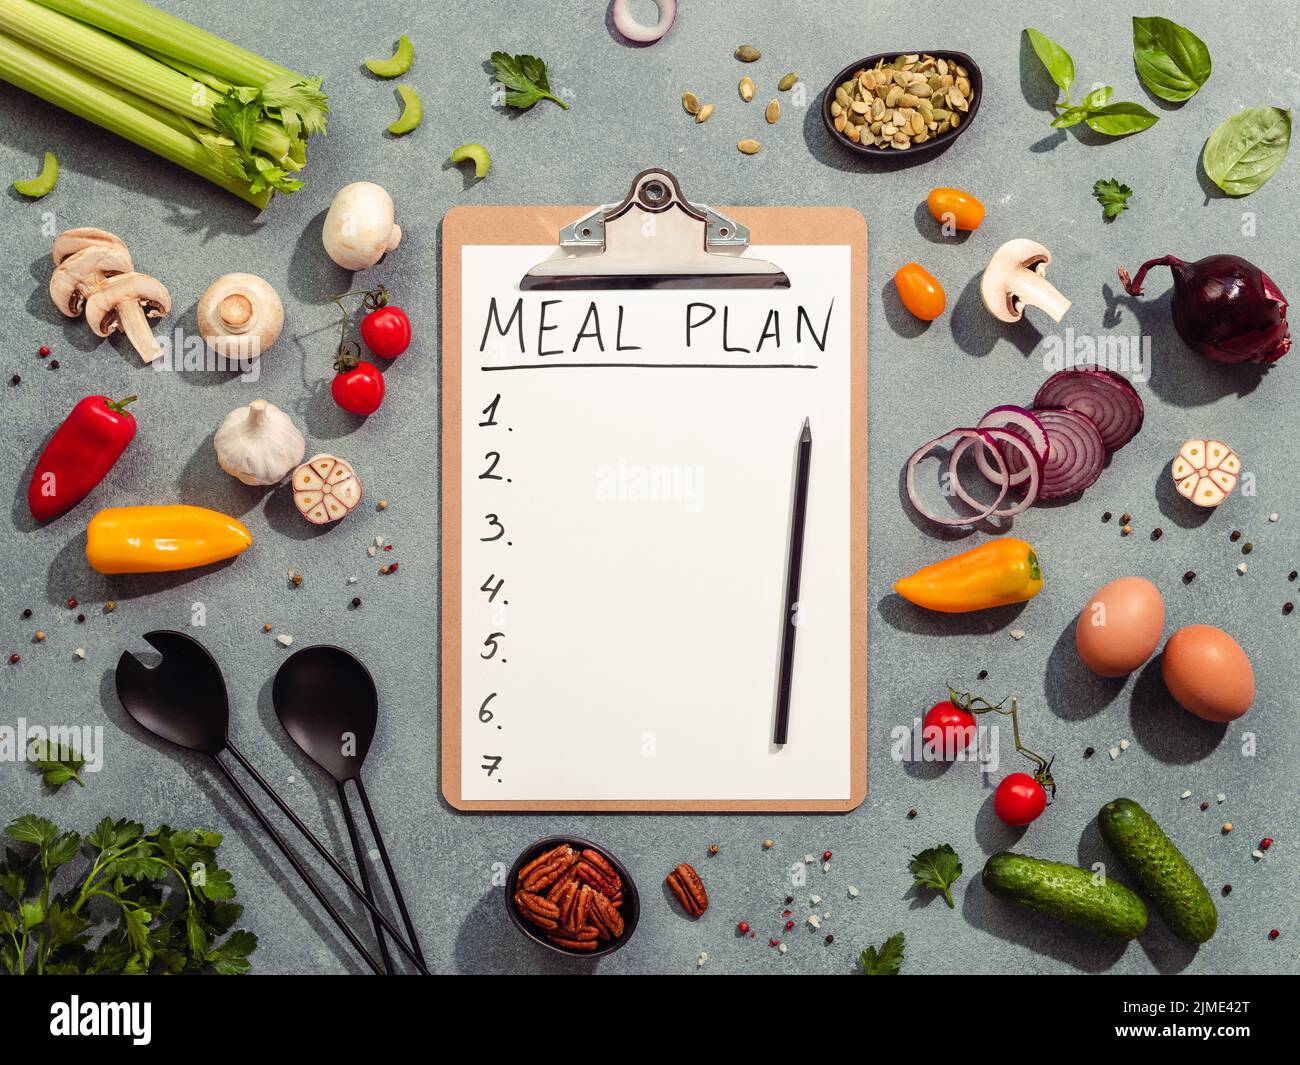 Meal plan concept. Food ingredients, salad serving utensils and clipboard with letters MEAL PLAN and seven numbers. Gray background. Diet menu concept Stock Photo